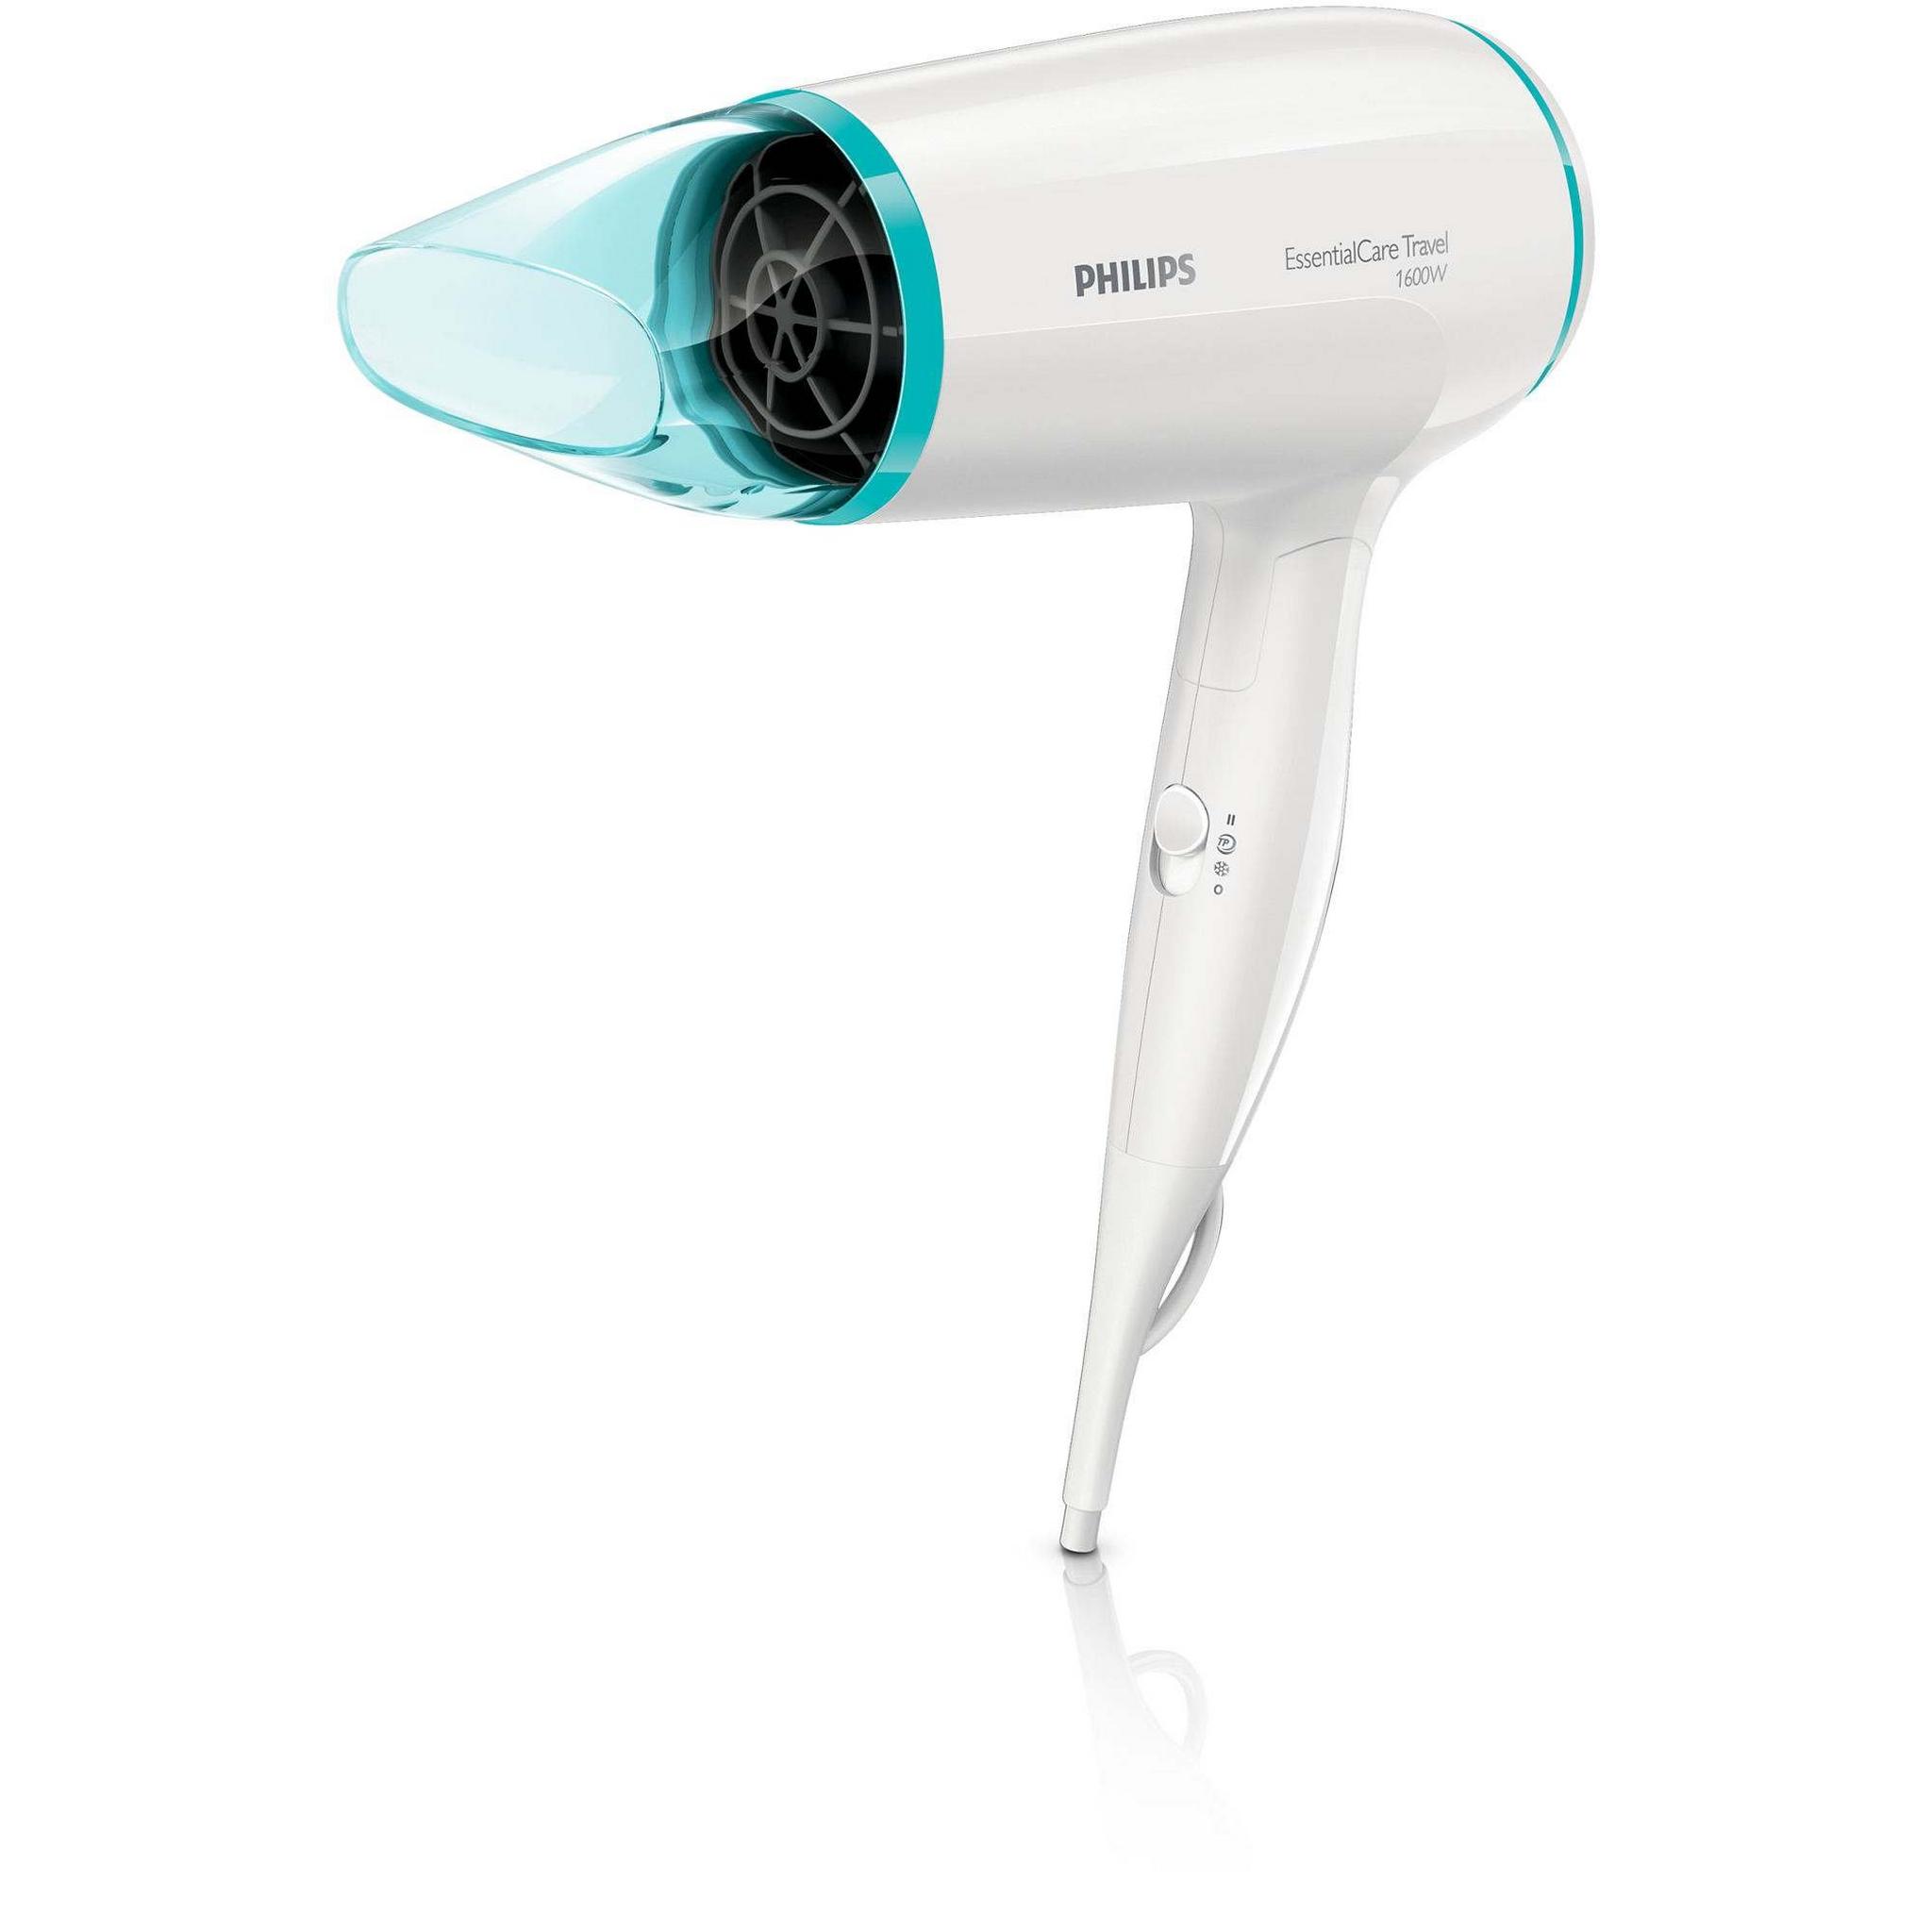 Philips BHD006/03 Essential Care Hair Dryer 1600W